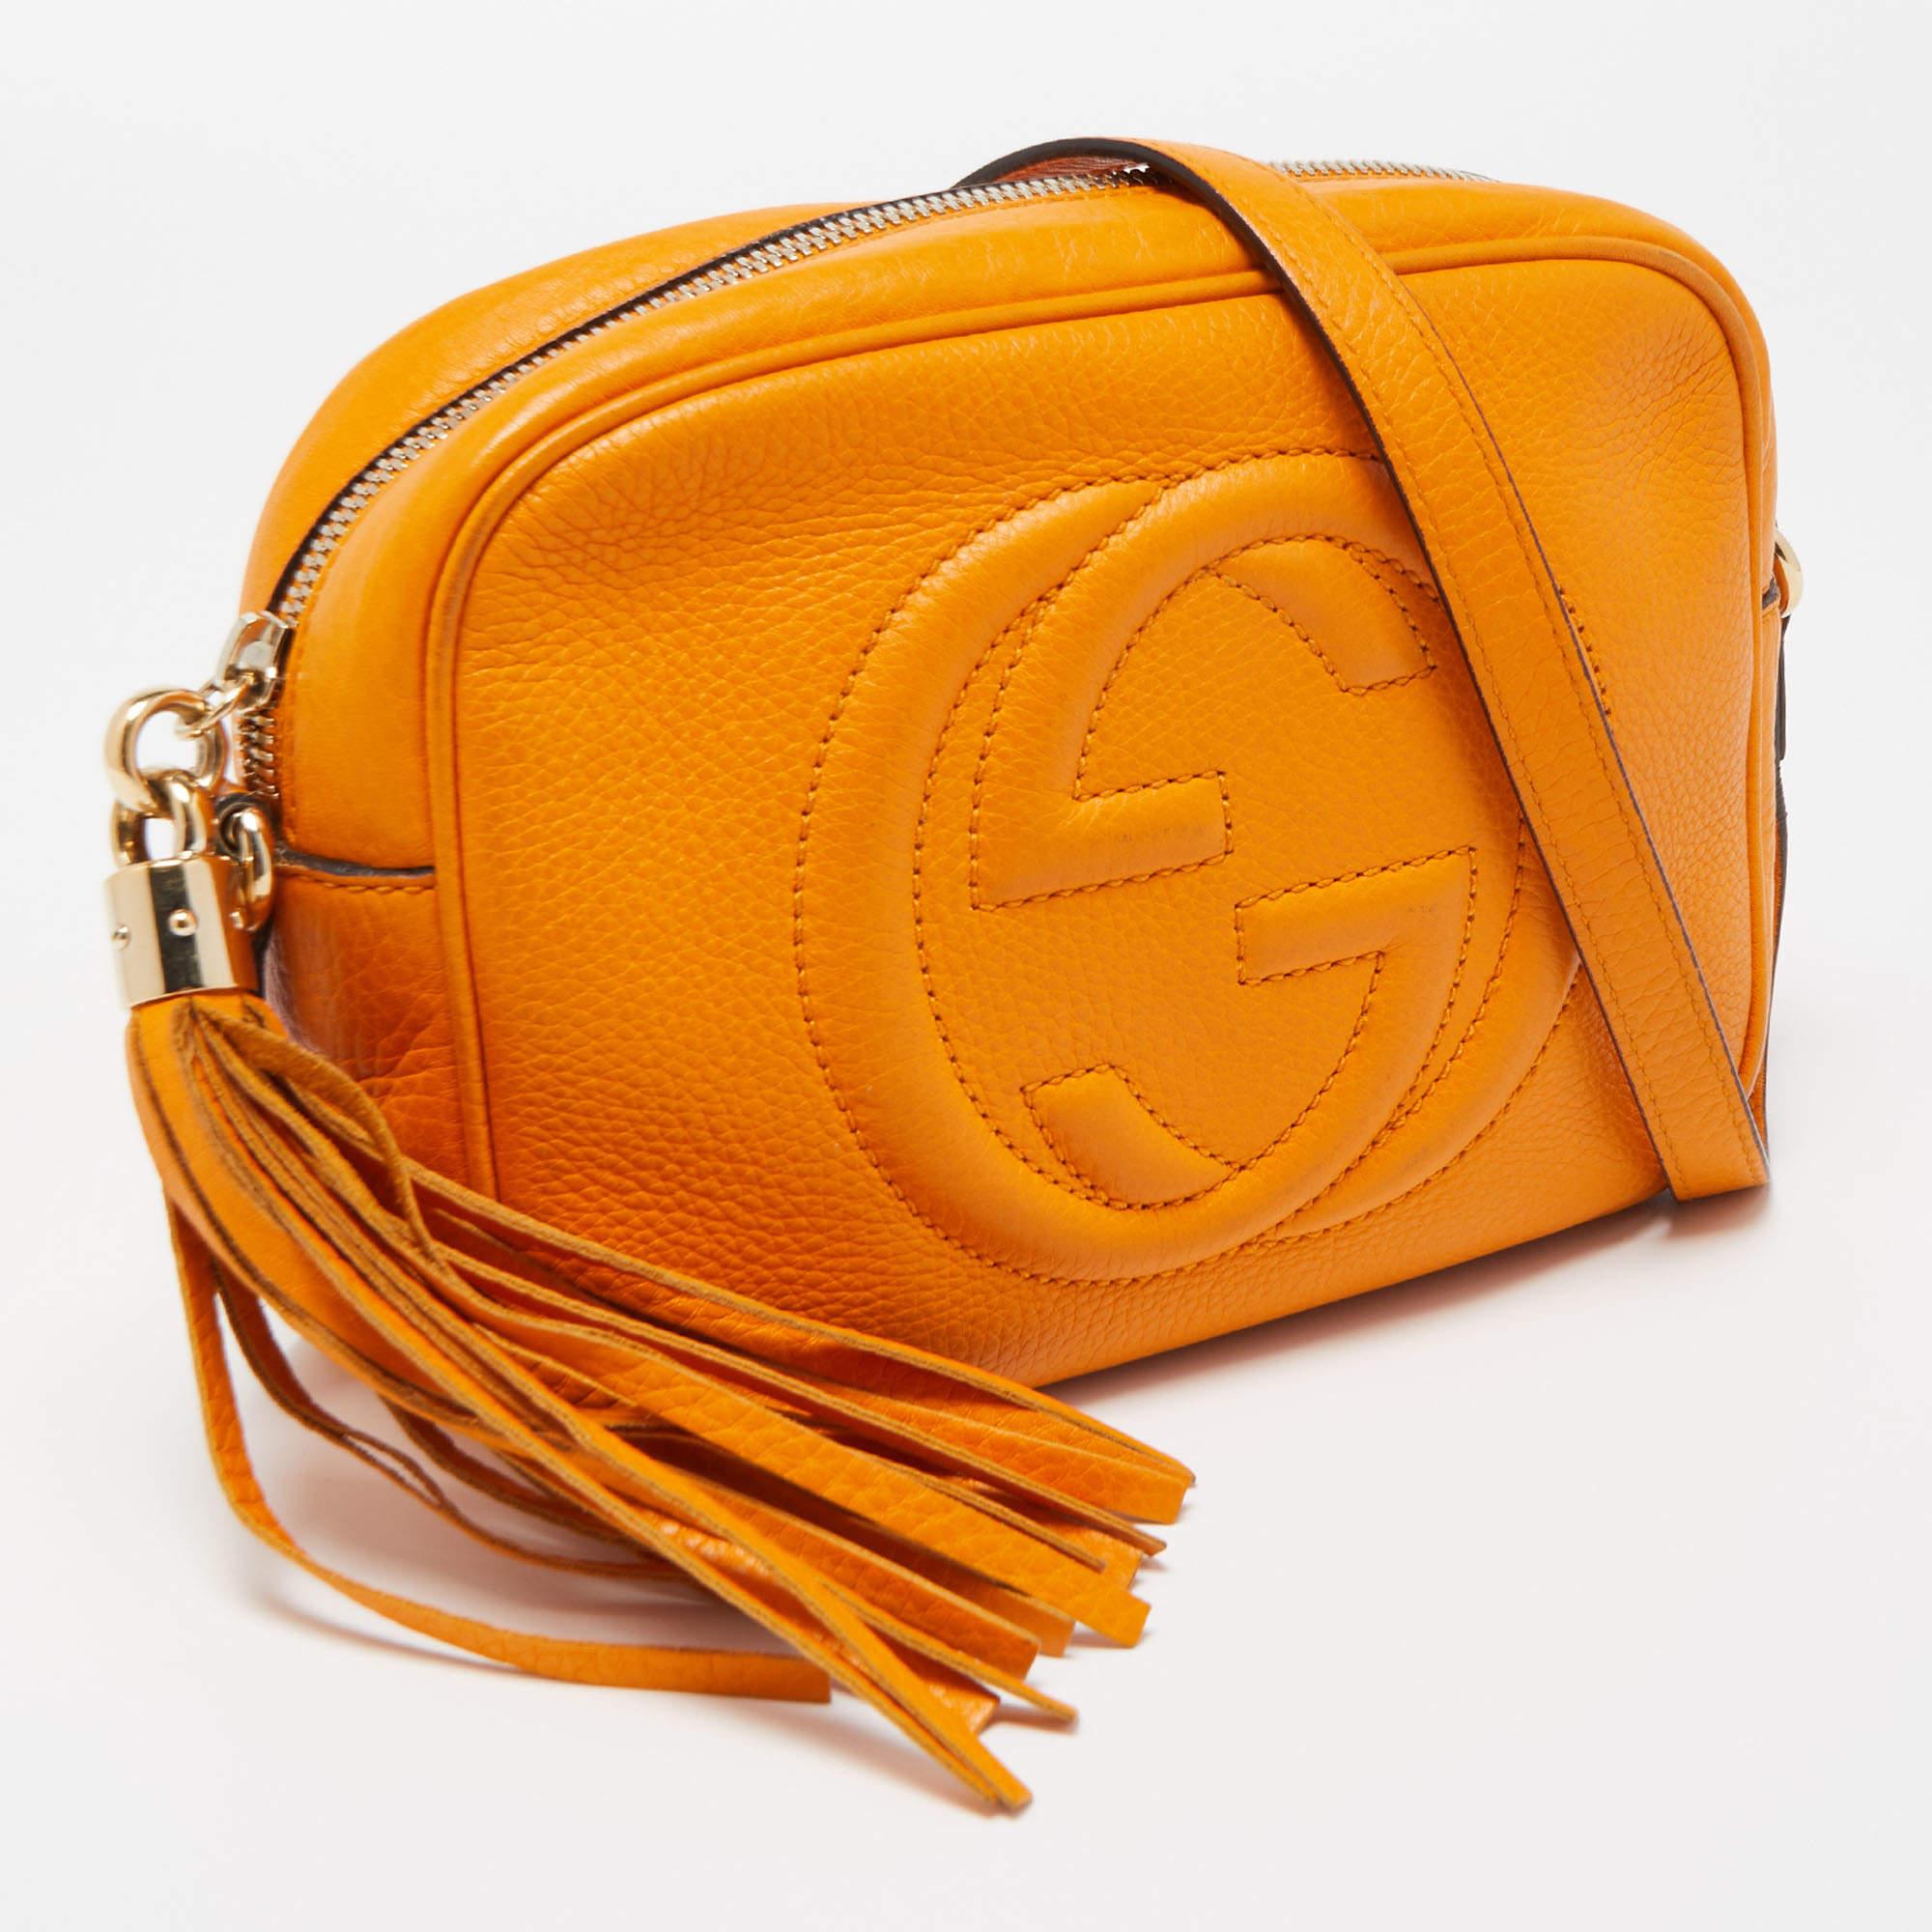 Gucci Mustard Yellow Leather Small Soho Disco Shoulder Bag 6